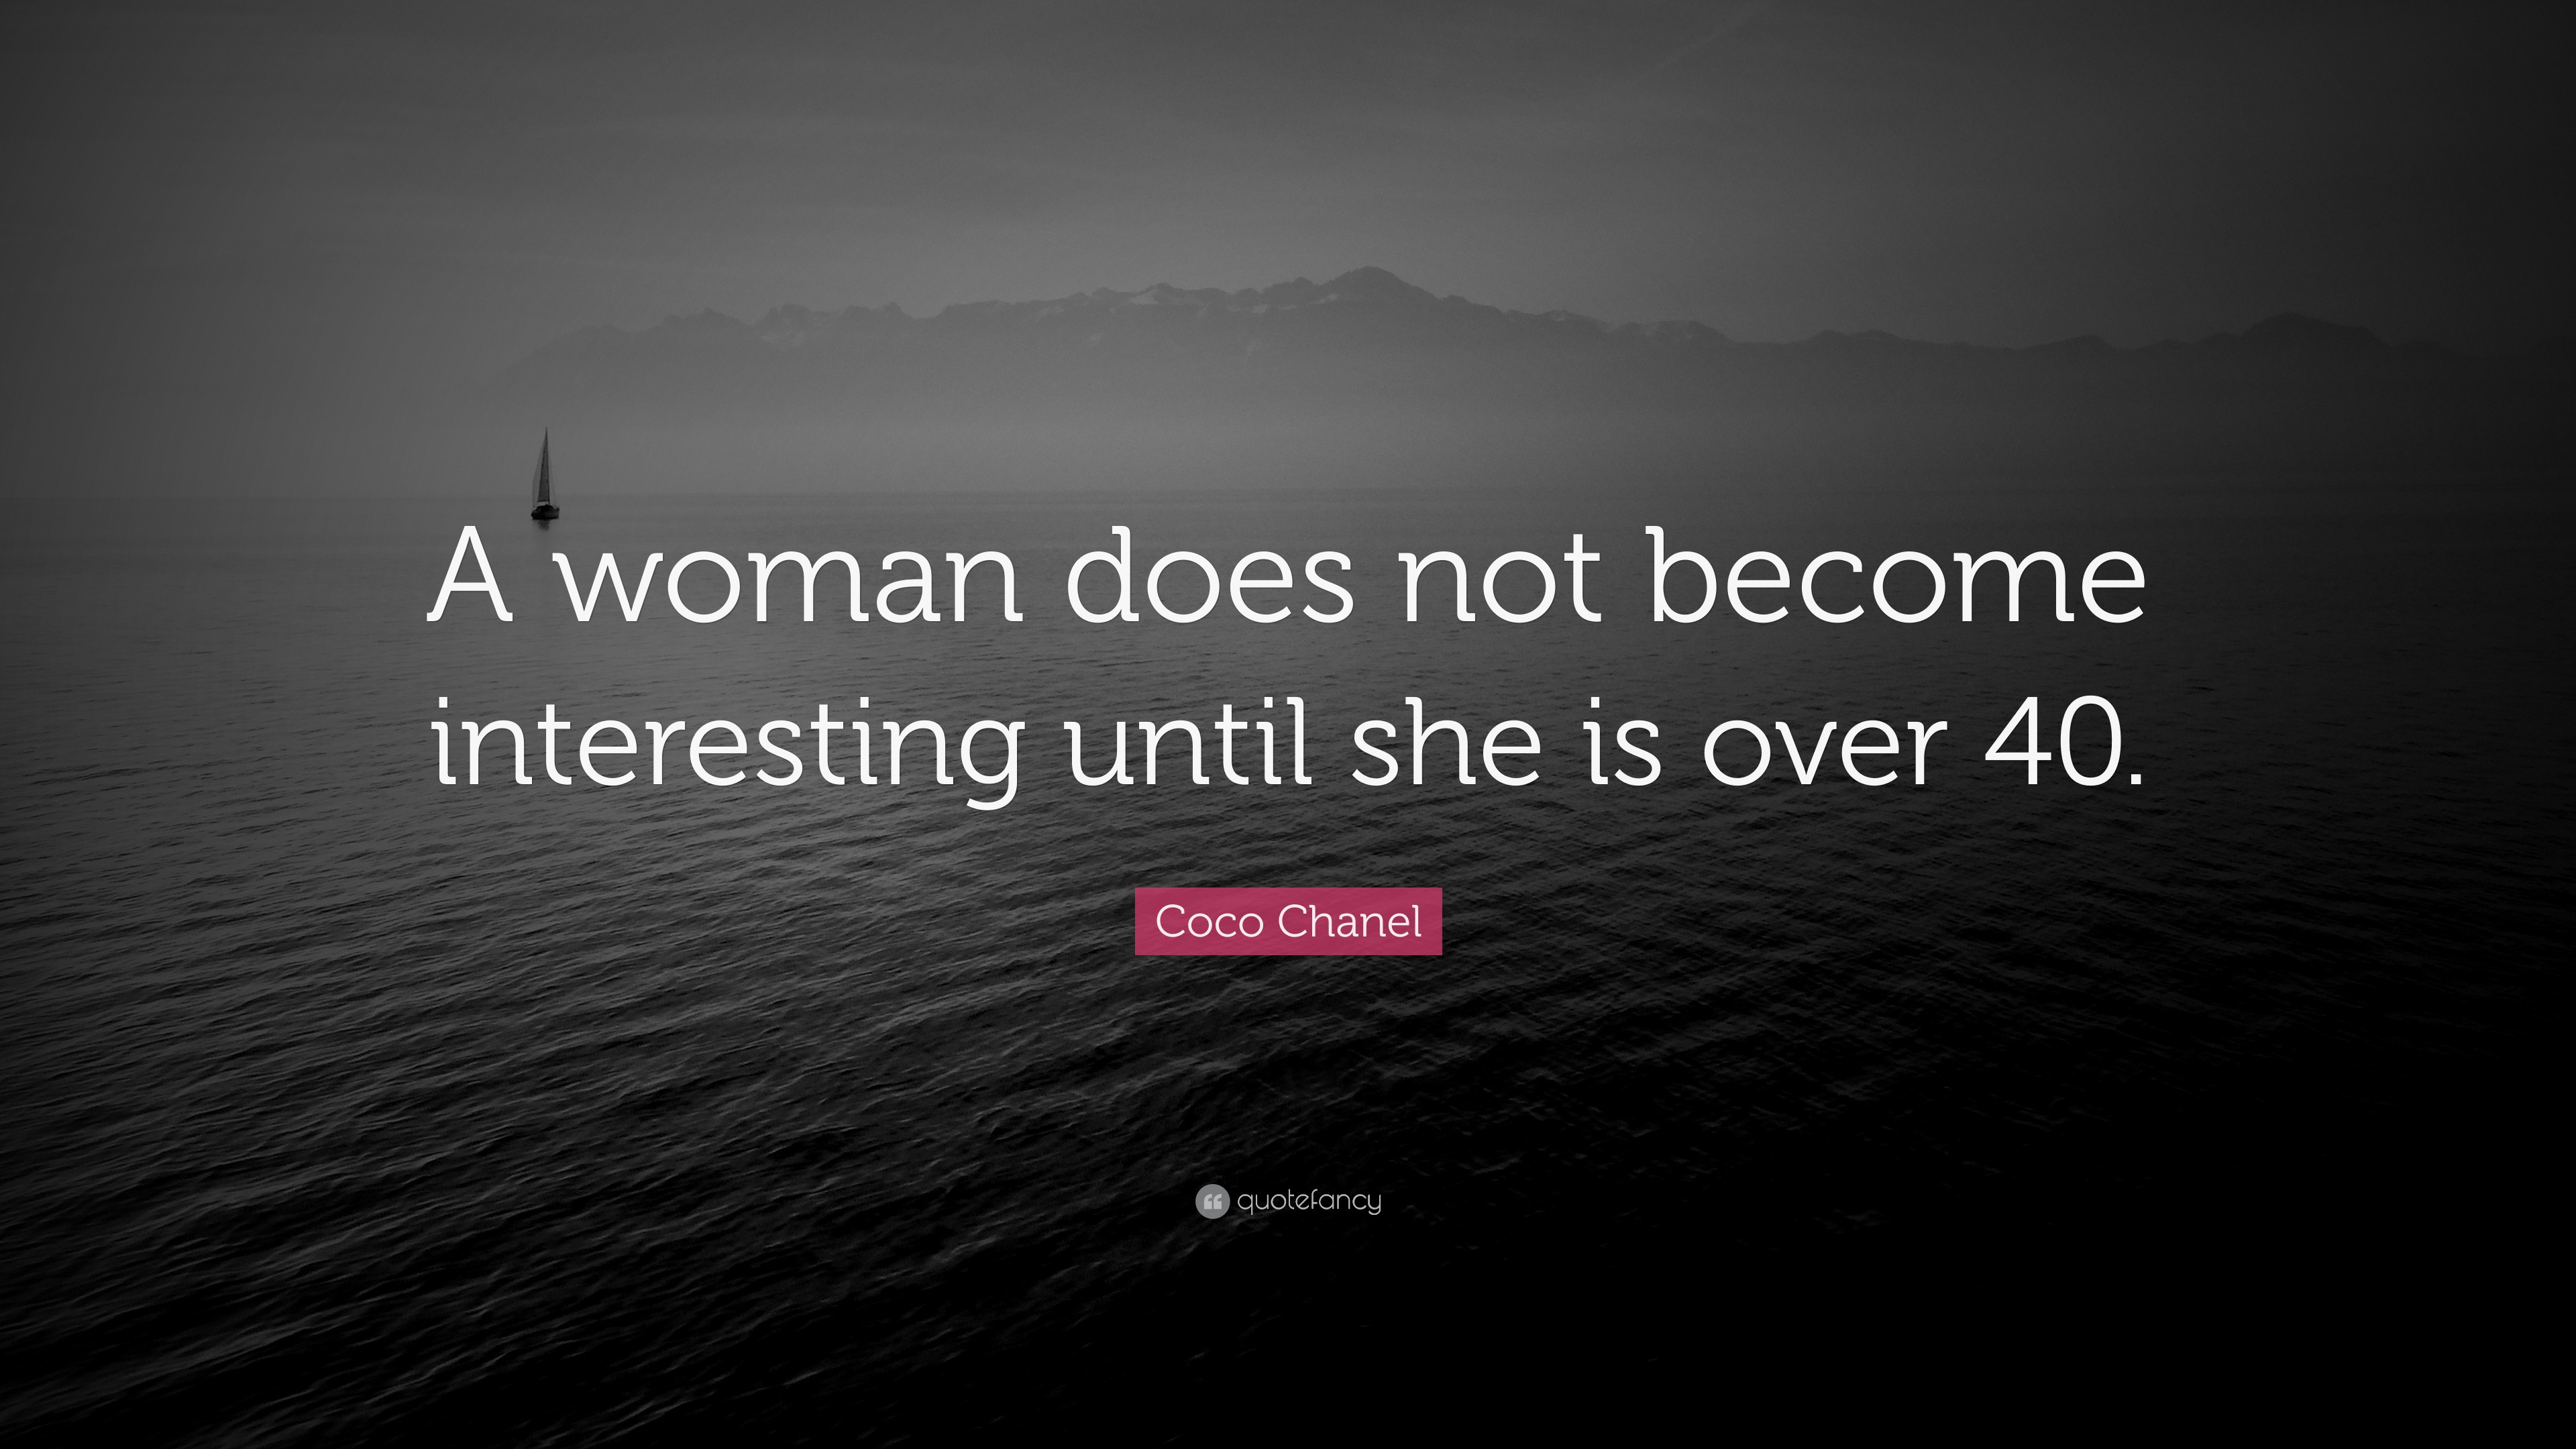 A woman does not become interesting until she is over 40. Coco Chanel